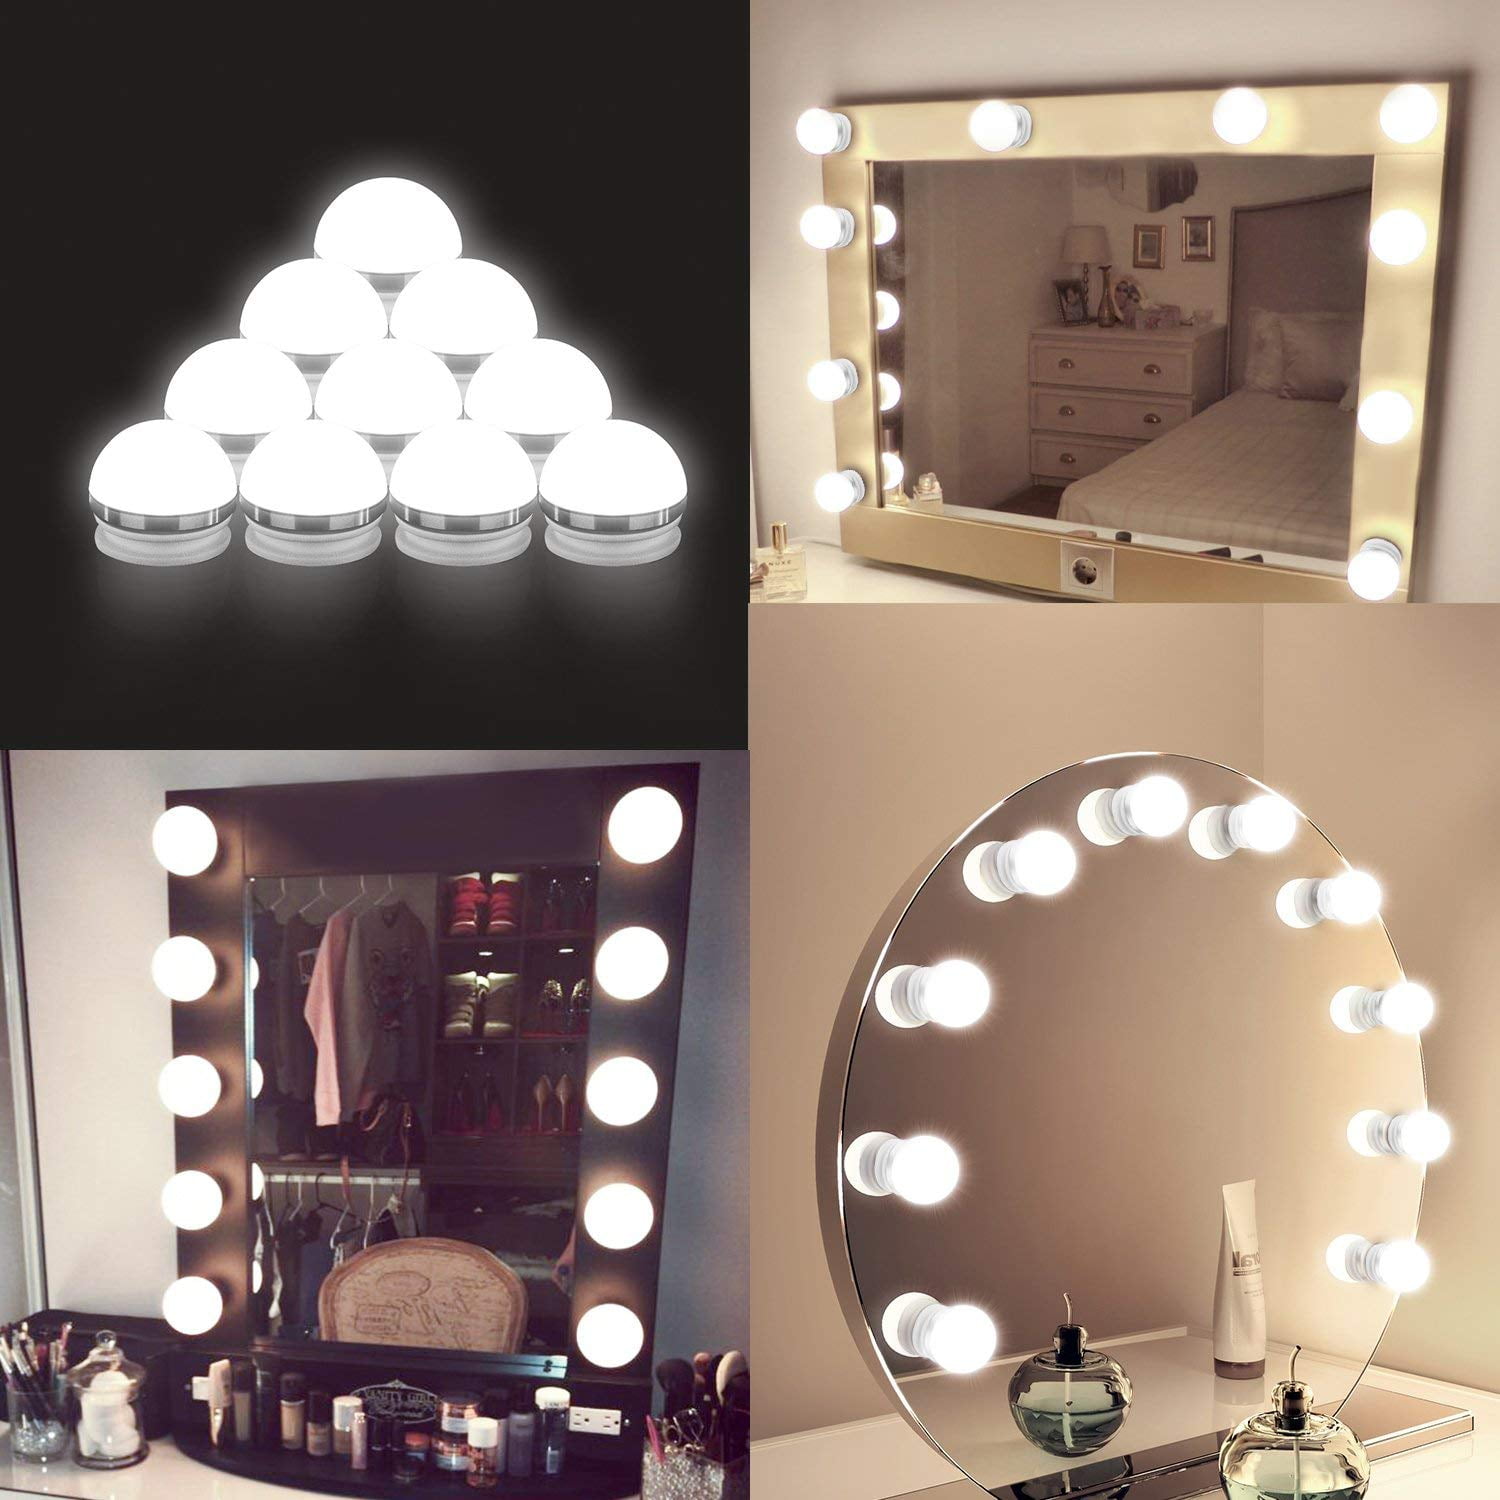 20 FT Mirror Not Included 14 Light Waneway Hollywood DIY Vanity Lights Strip Kit for Lighted Makeup Dressing Table Mirror Plug in LED Lighting Fixture with Dimmer and Power Supply 